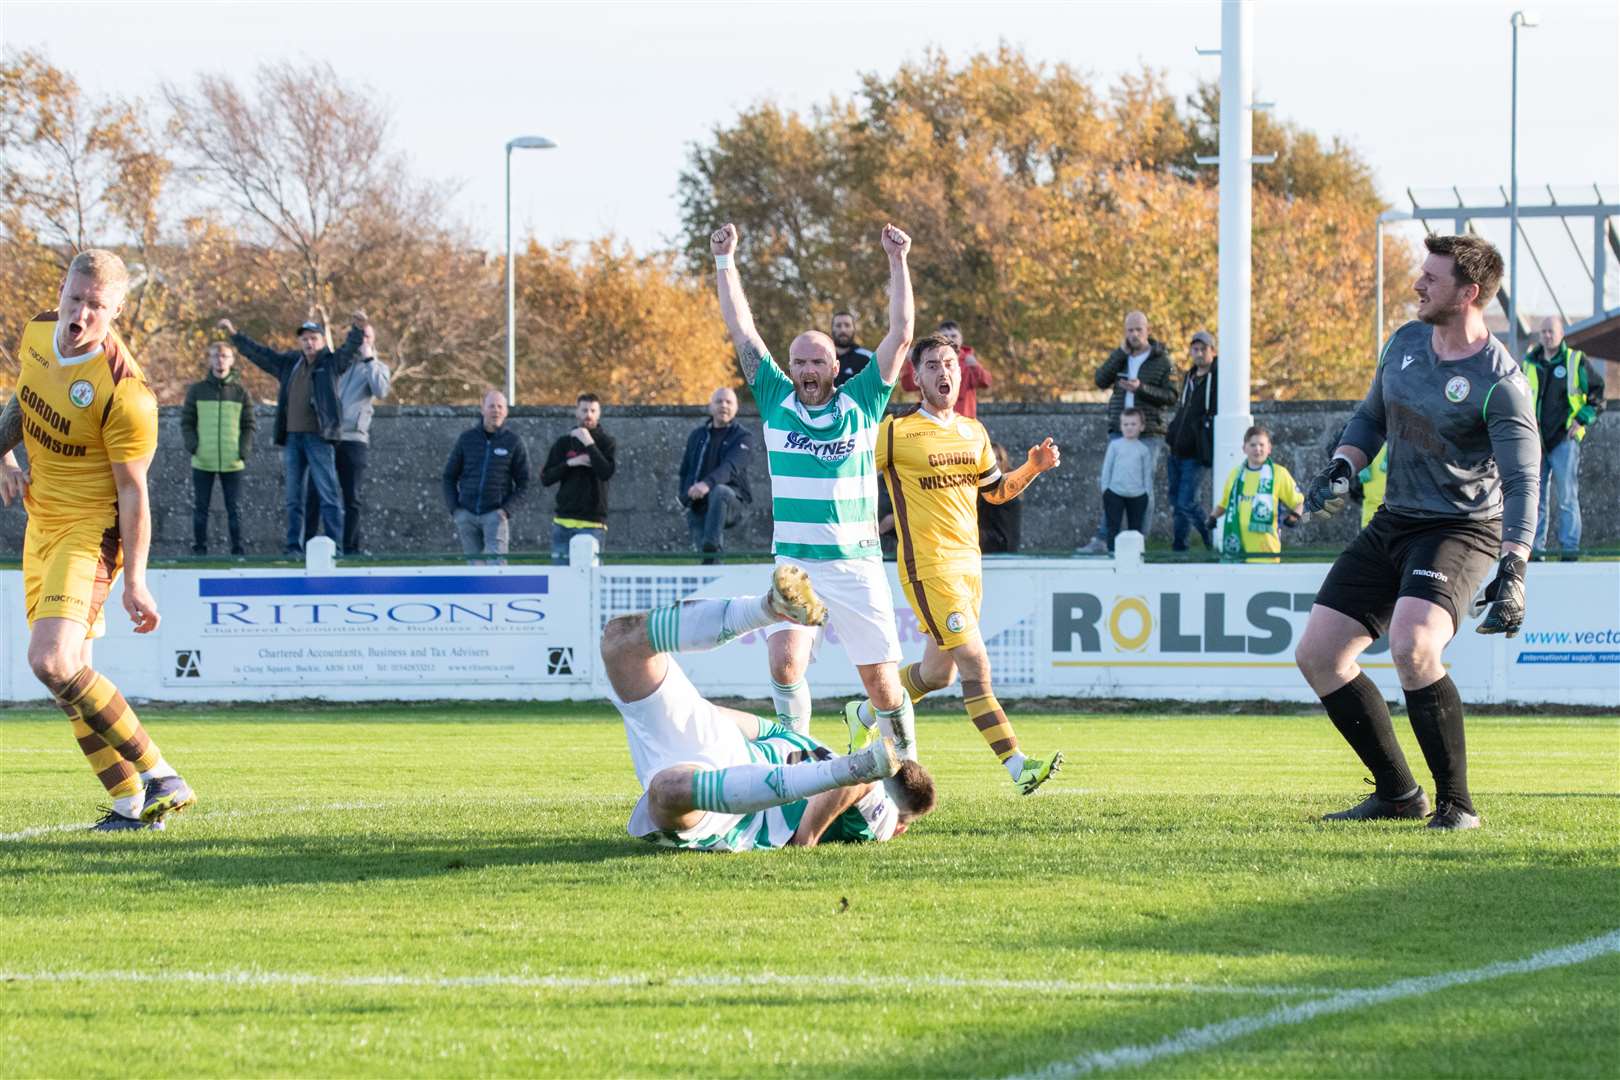 Celebrations after Buckie Thistle's Jack Murray heads home the opening goal for the Jags. ..Buckie Thistle FC (2) vs Forres Mechanics FC (0) - Highland Football League 22/23 - Victoria Park, Buckie 29/10/2022...Picture: Daniel Forsyth..